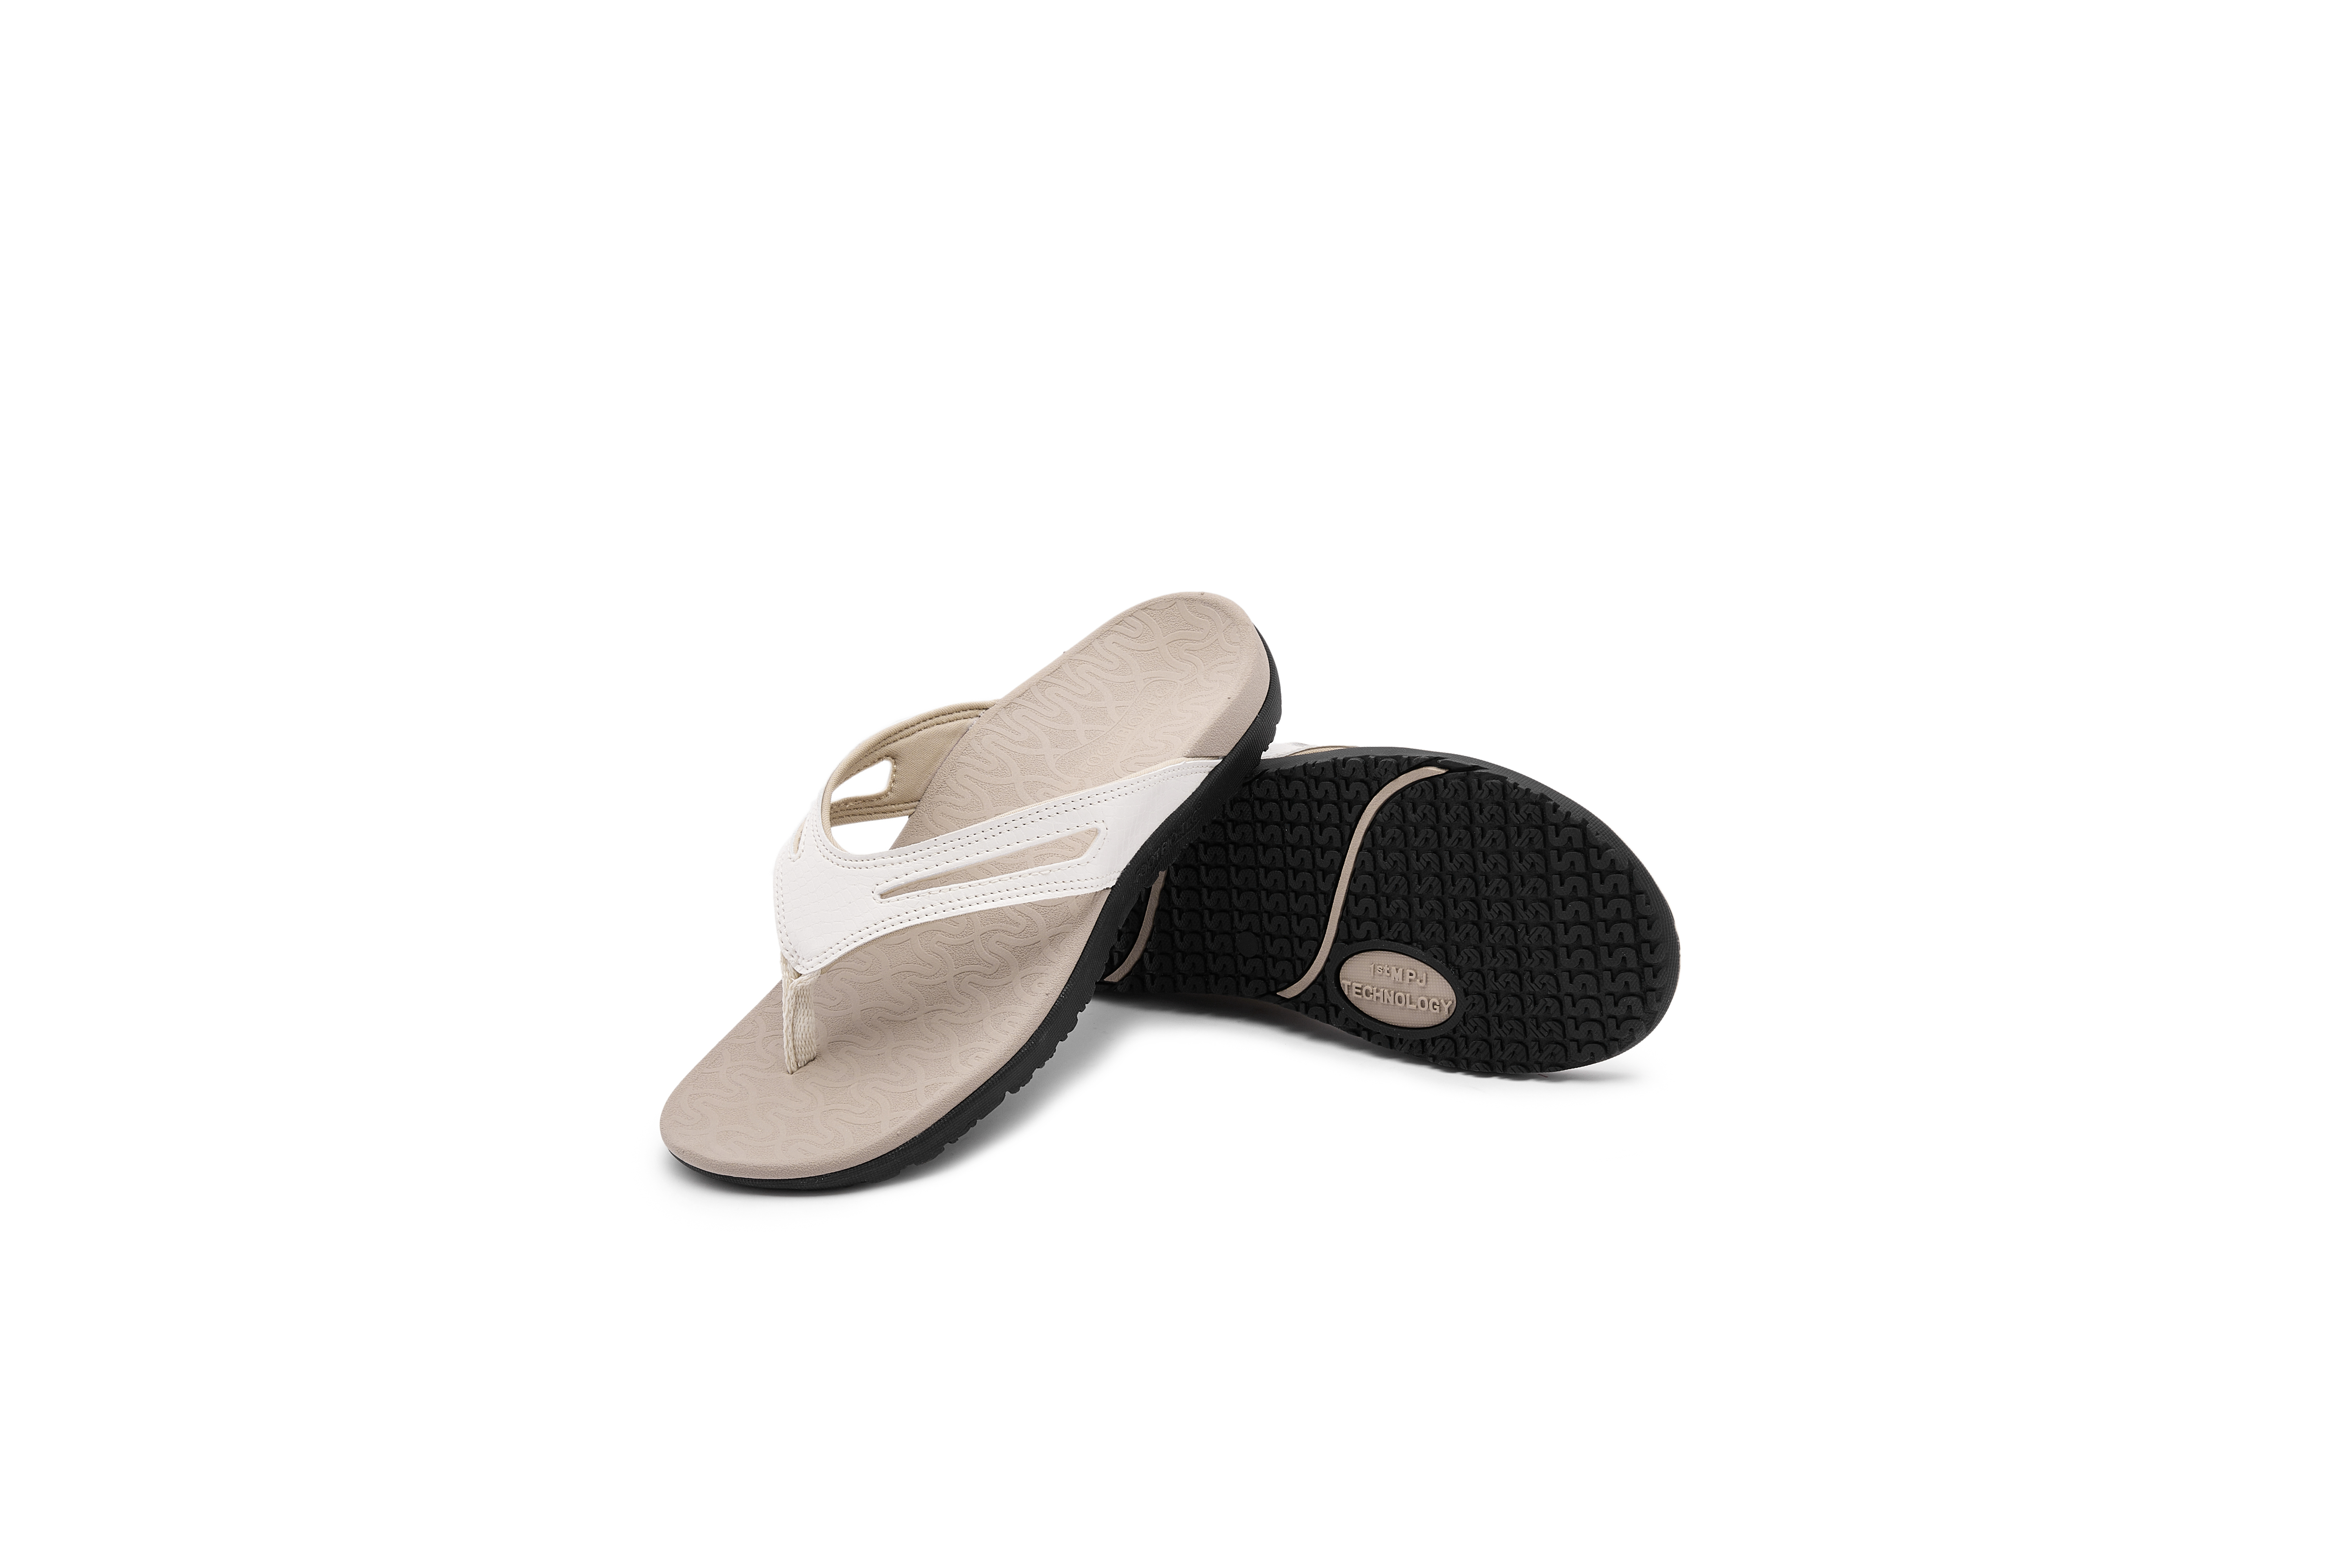 Spring white - Comfortable specialist orthotic footwear